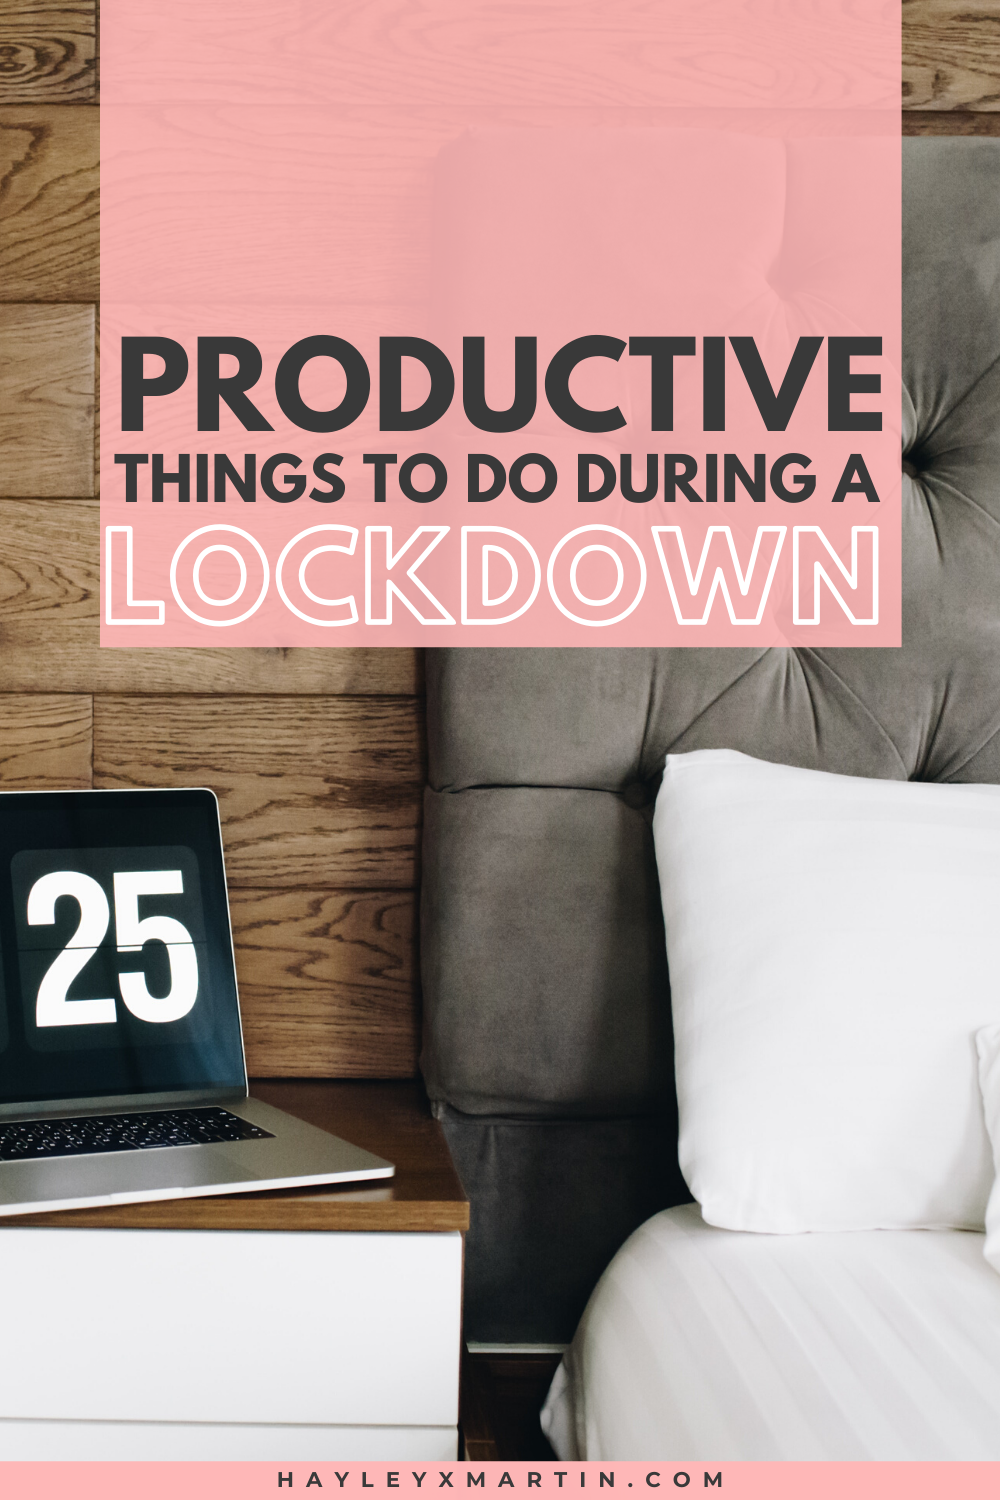 PRODUCTIVE THINGS TO DO DURING A LOCKDOWN | HAYLEYXMARTIN